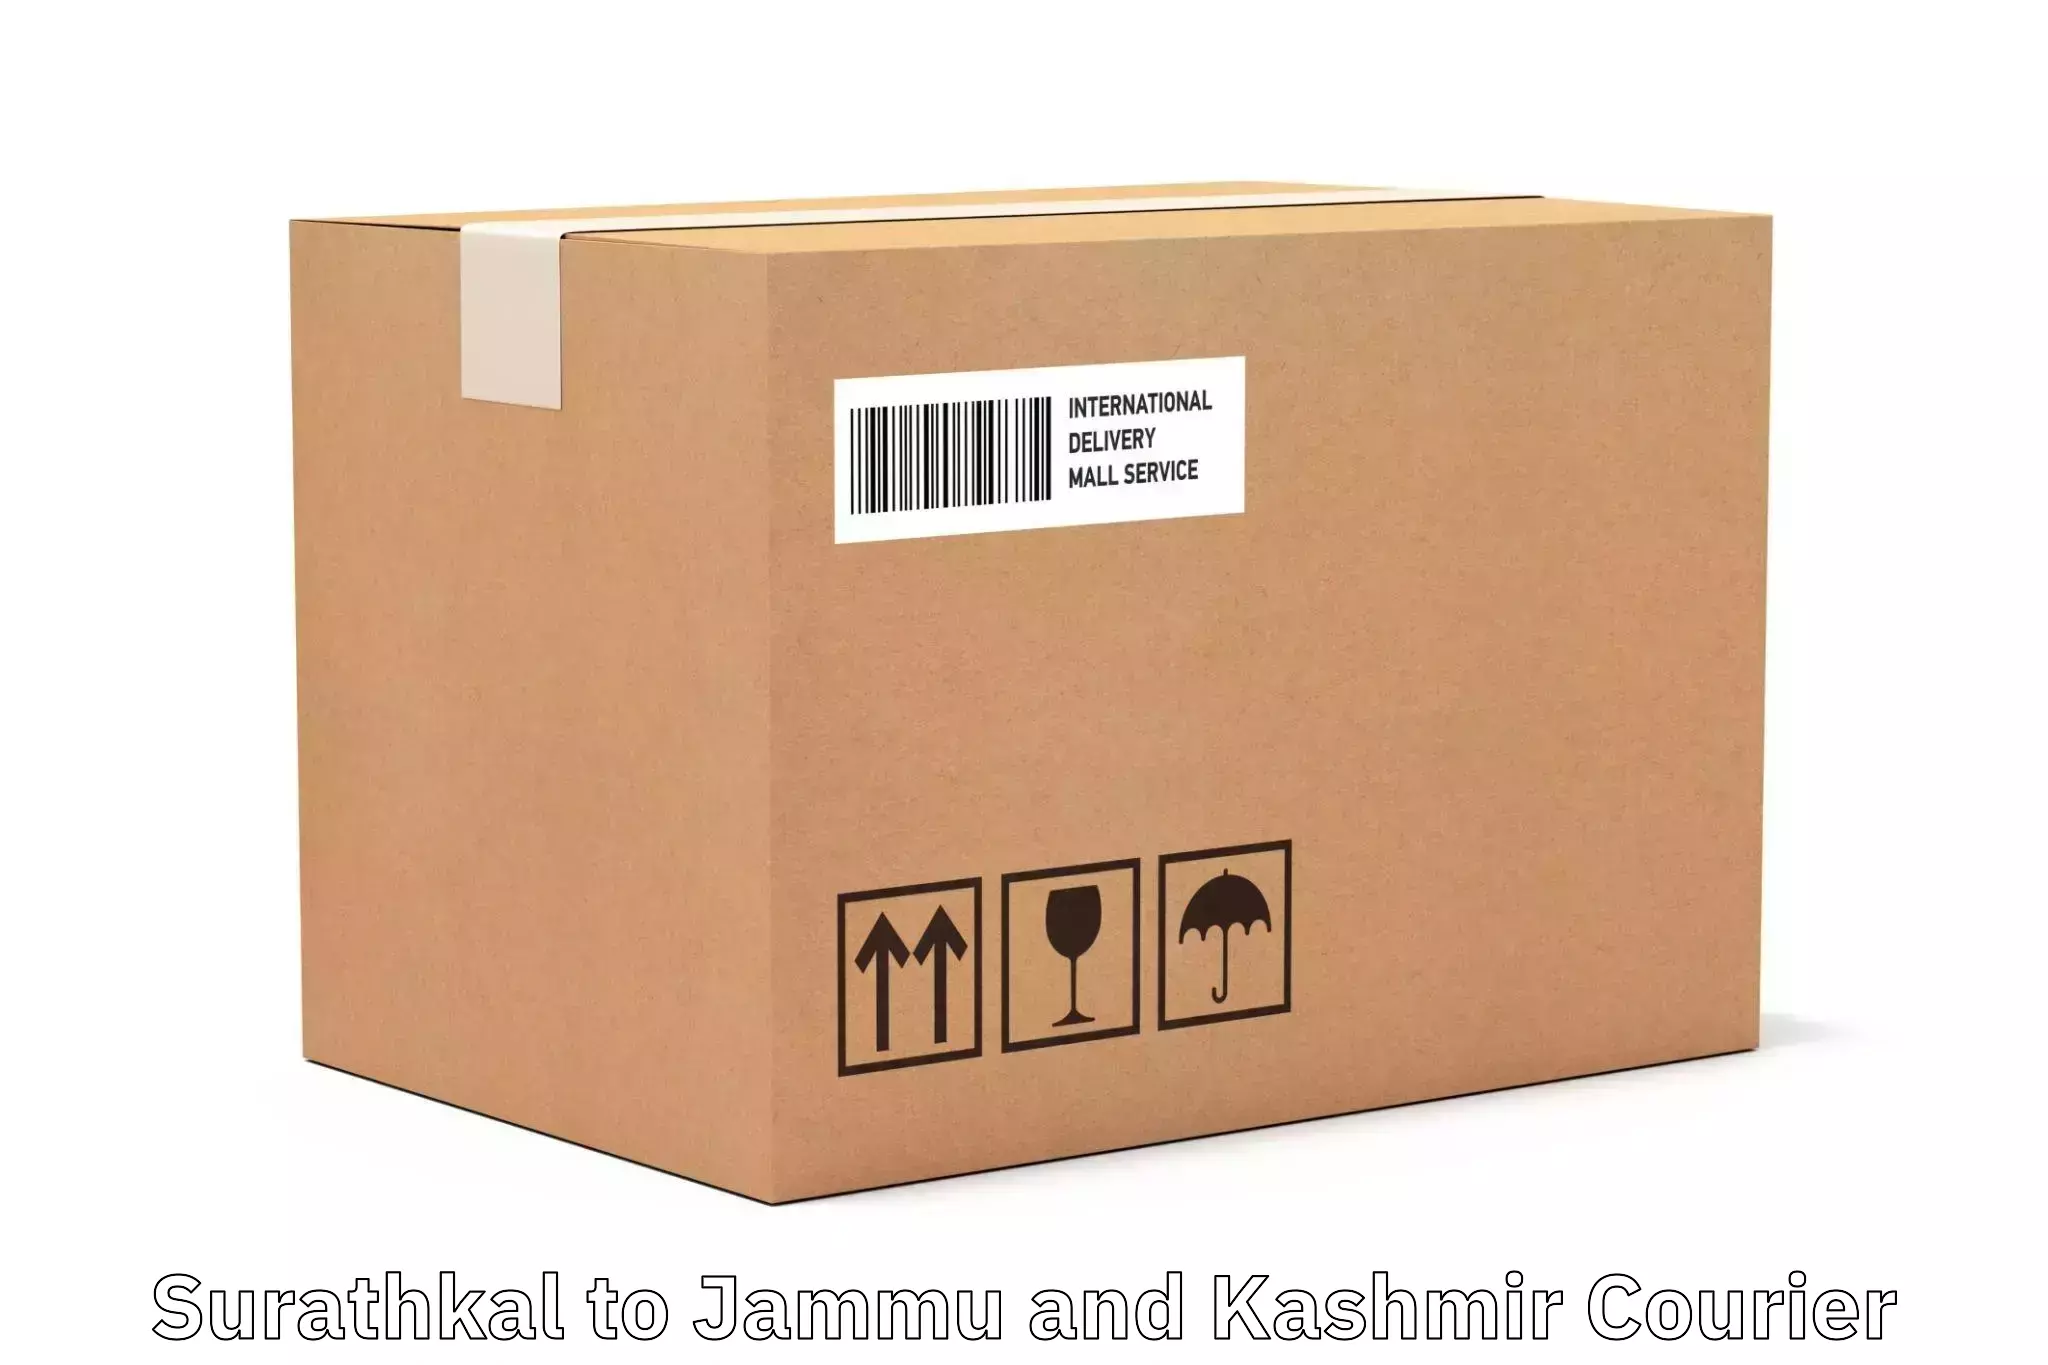 High-quality delivery services Surathkal to Kupwara